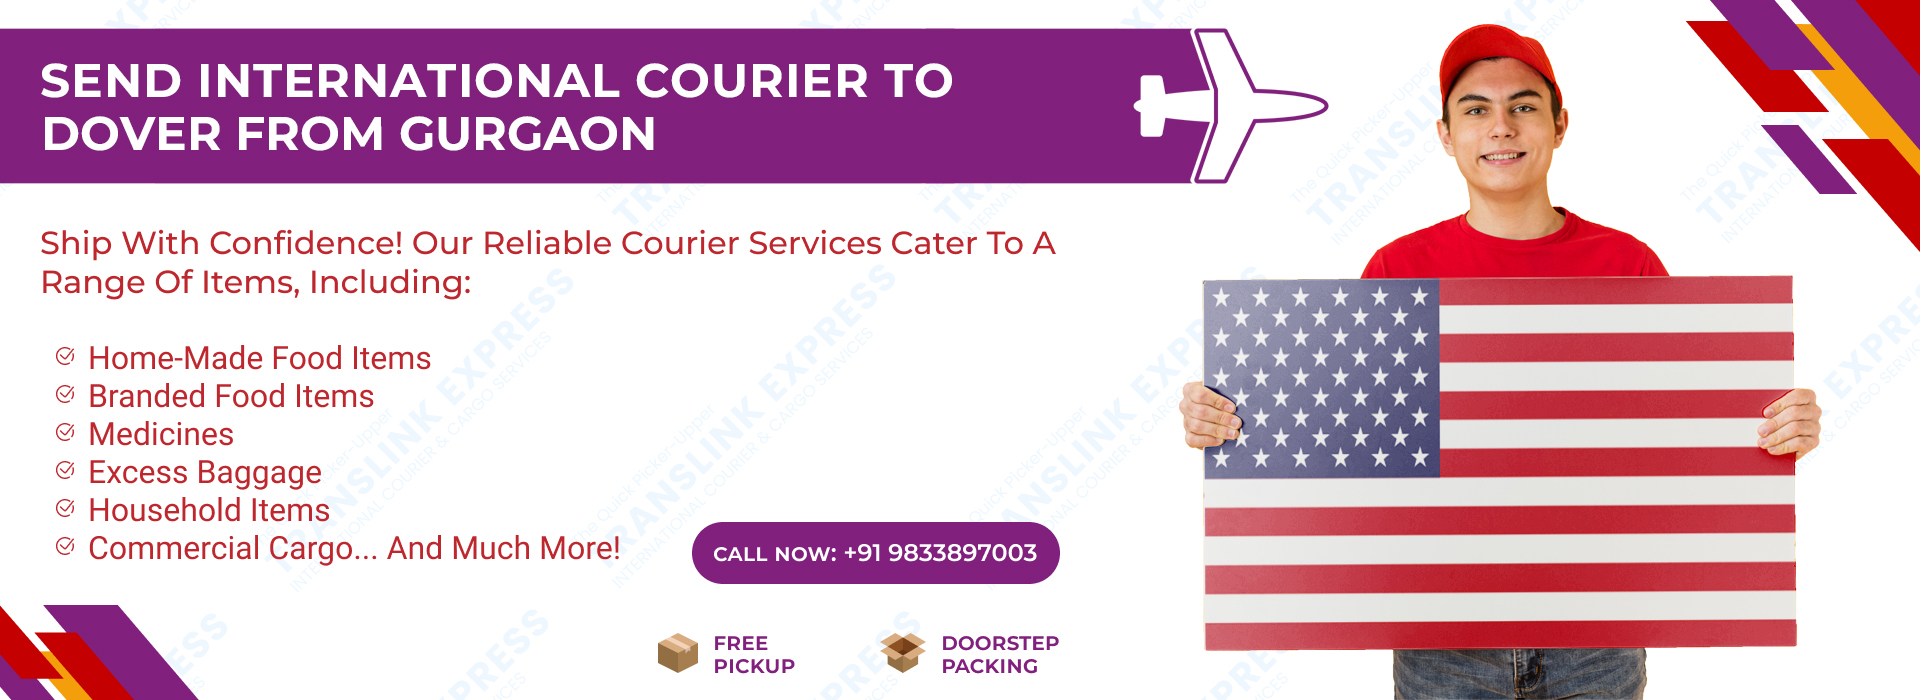 Courier to Dover From Gurgaon